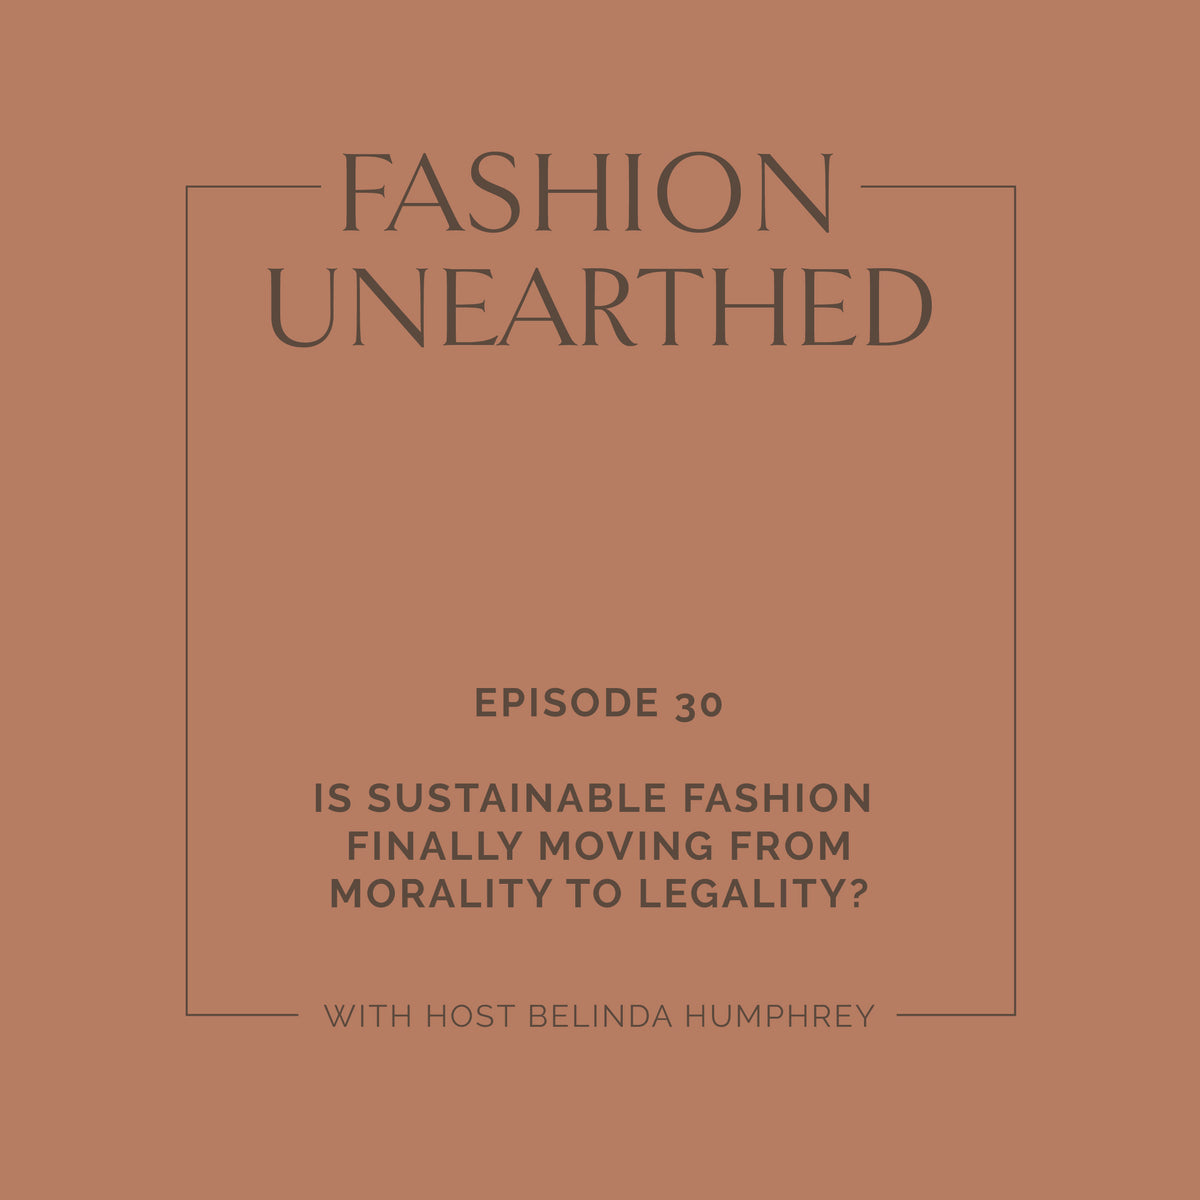 EPISODE 30: Is Sustainable Fashion finally moving from Morality to Legality?